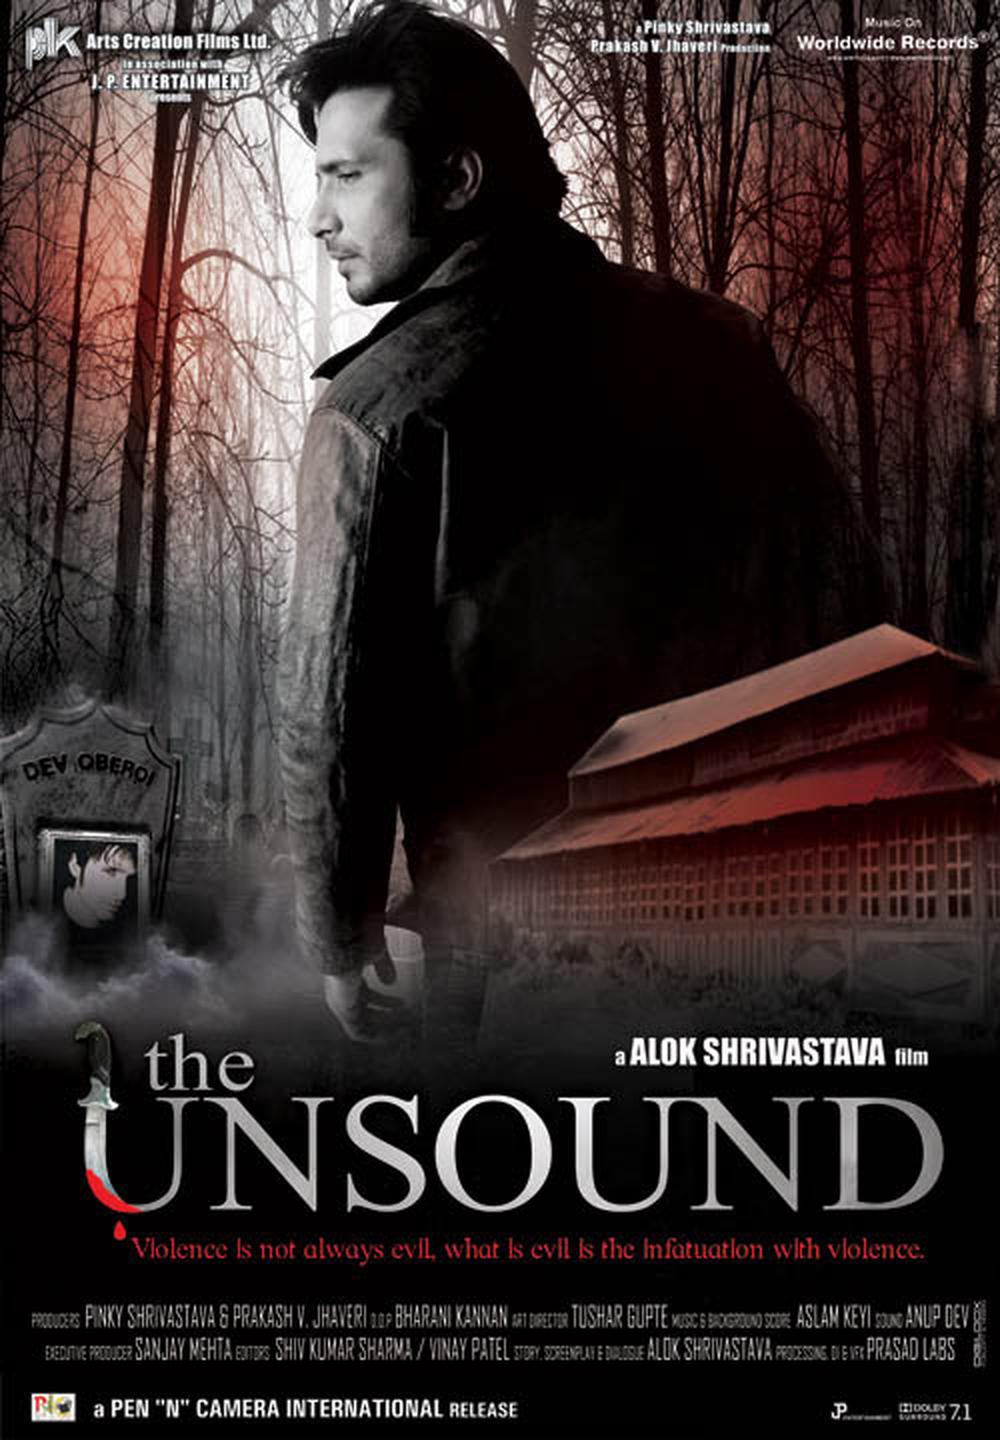 The Unsound Movie Review